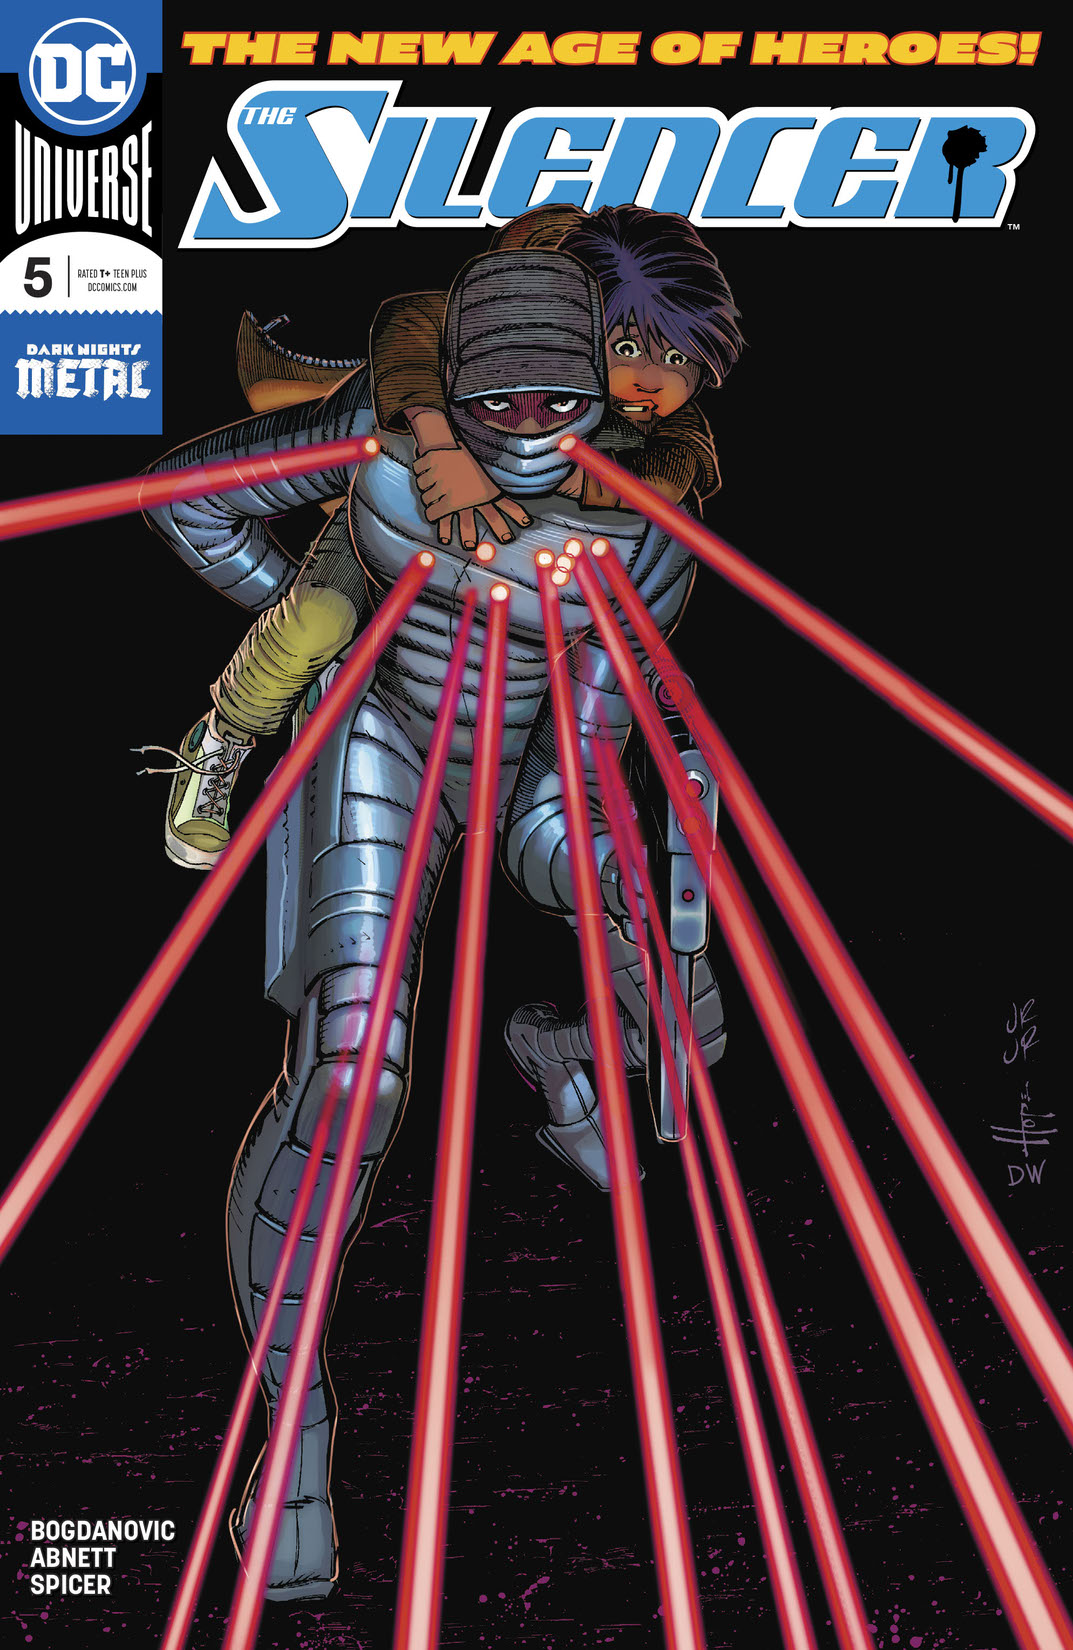 The Silencer #5 preview images